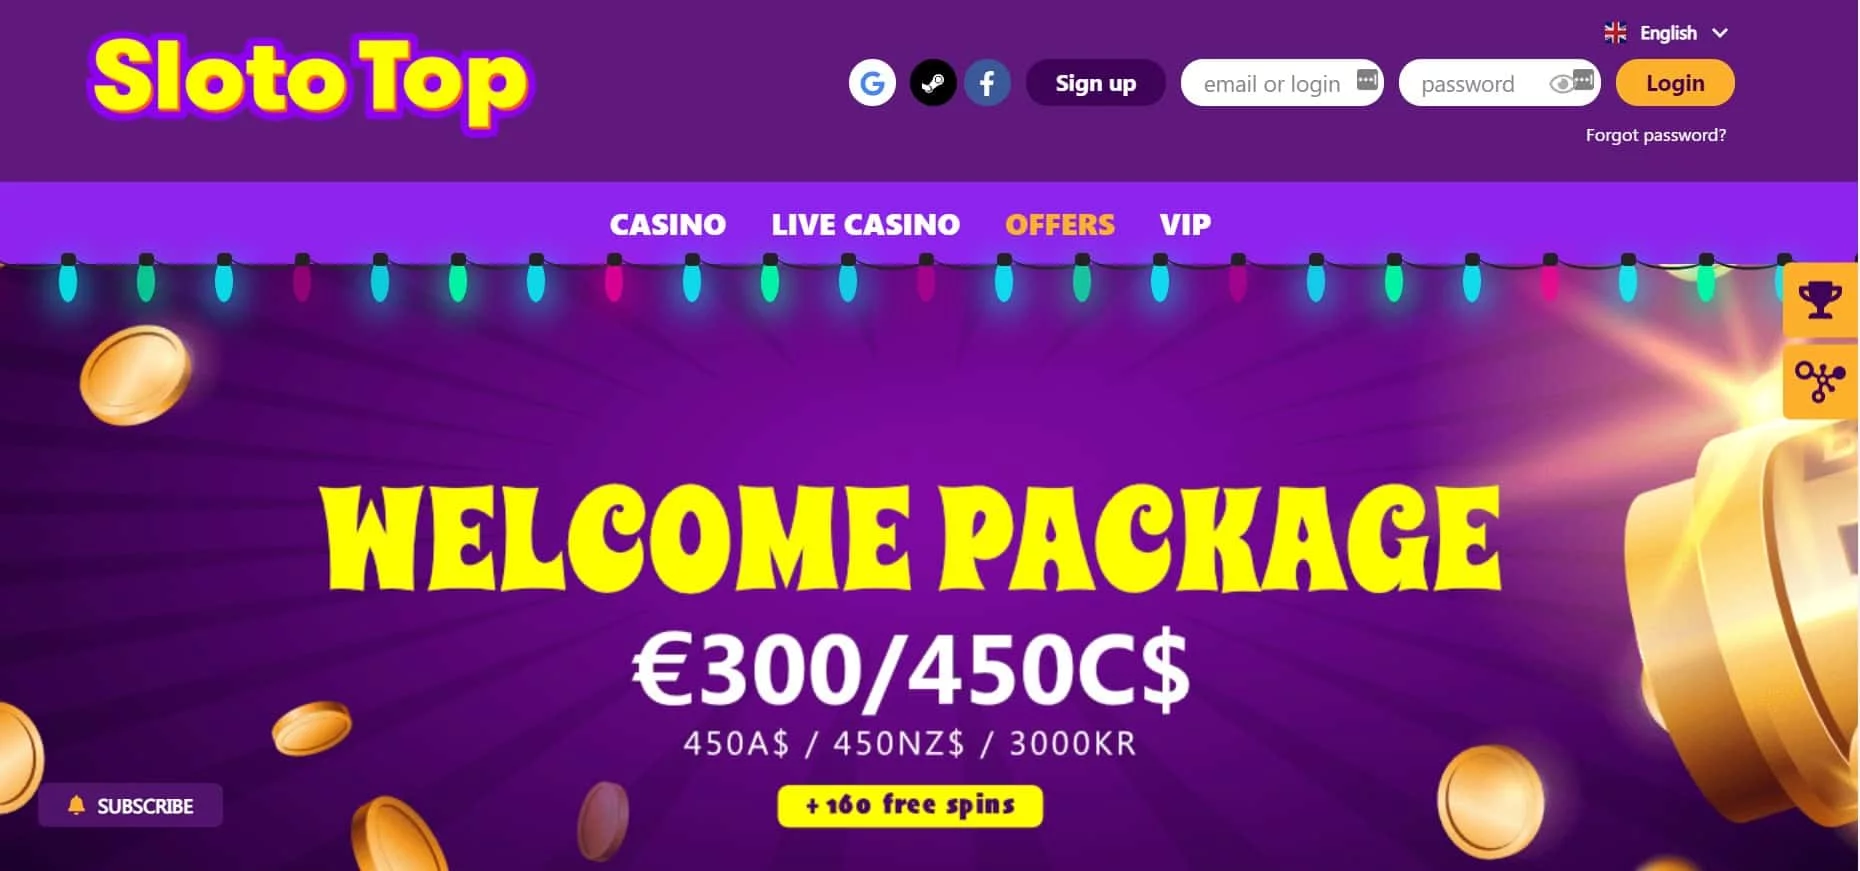 slototop casino welcome package-min